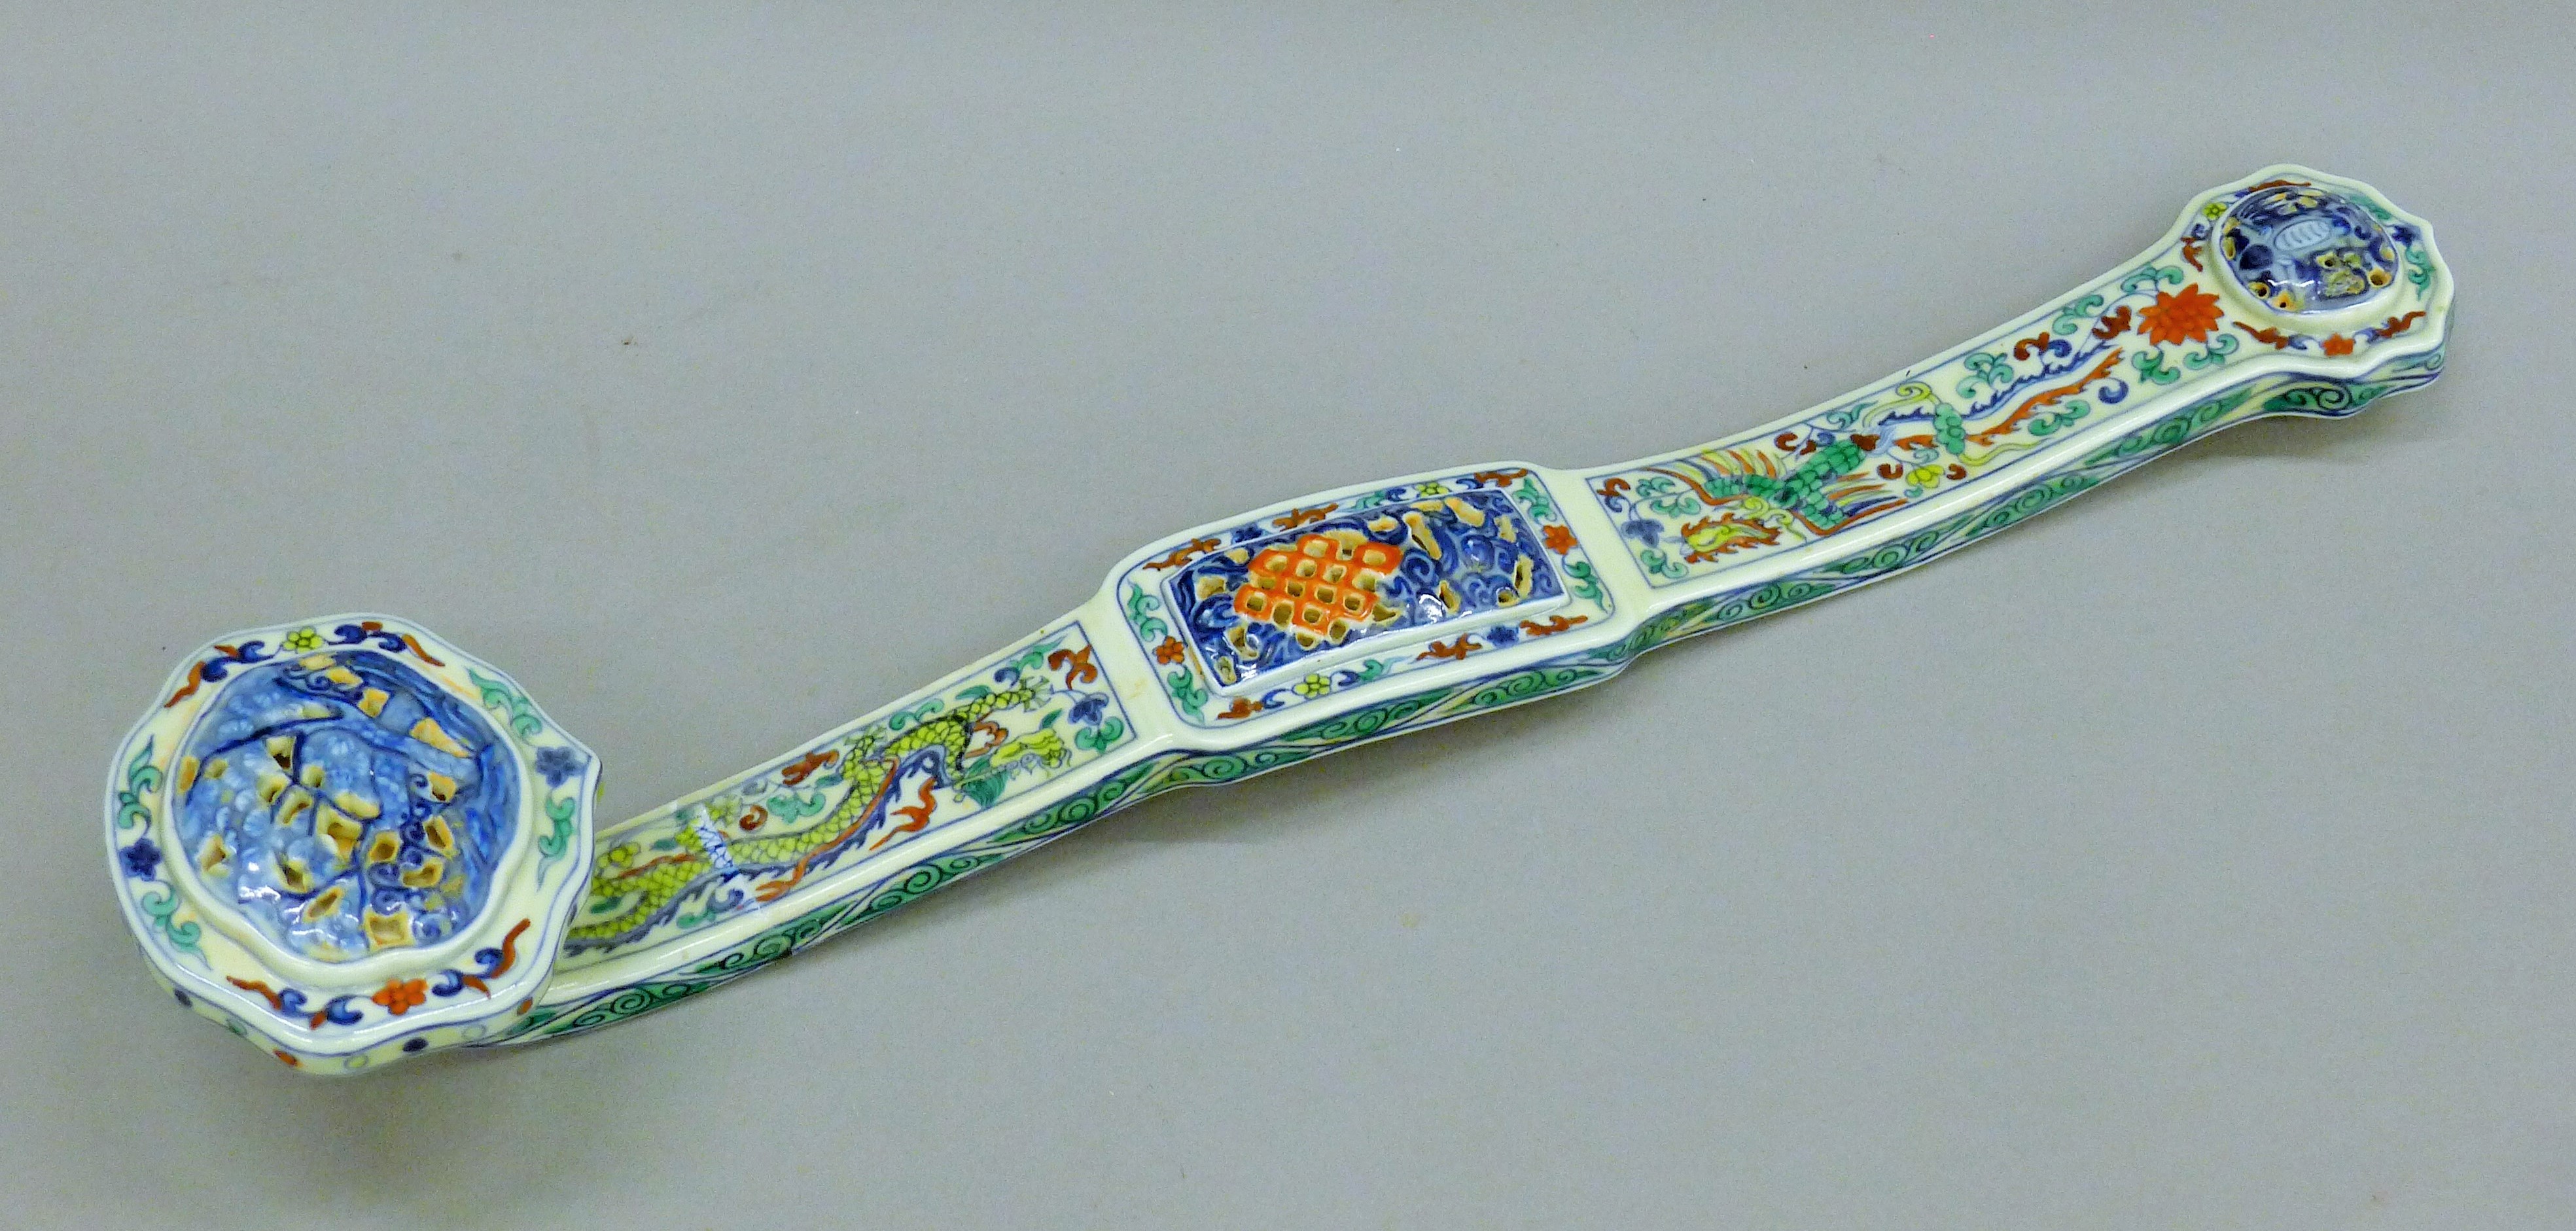 A Chinese porcelain ruyi sceptre with dragon and phoenix decoration. 49 cm long.